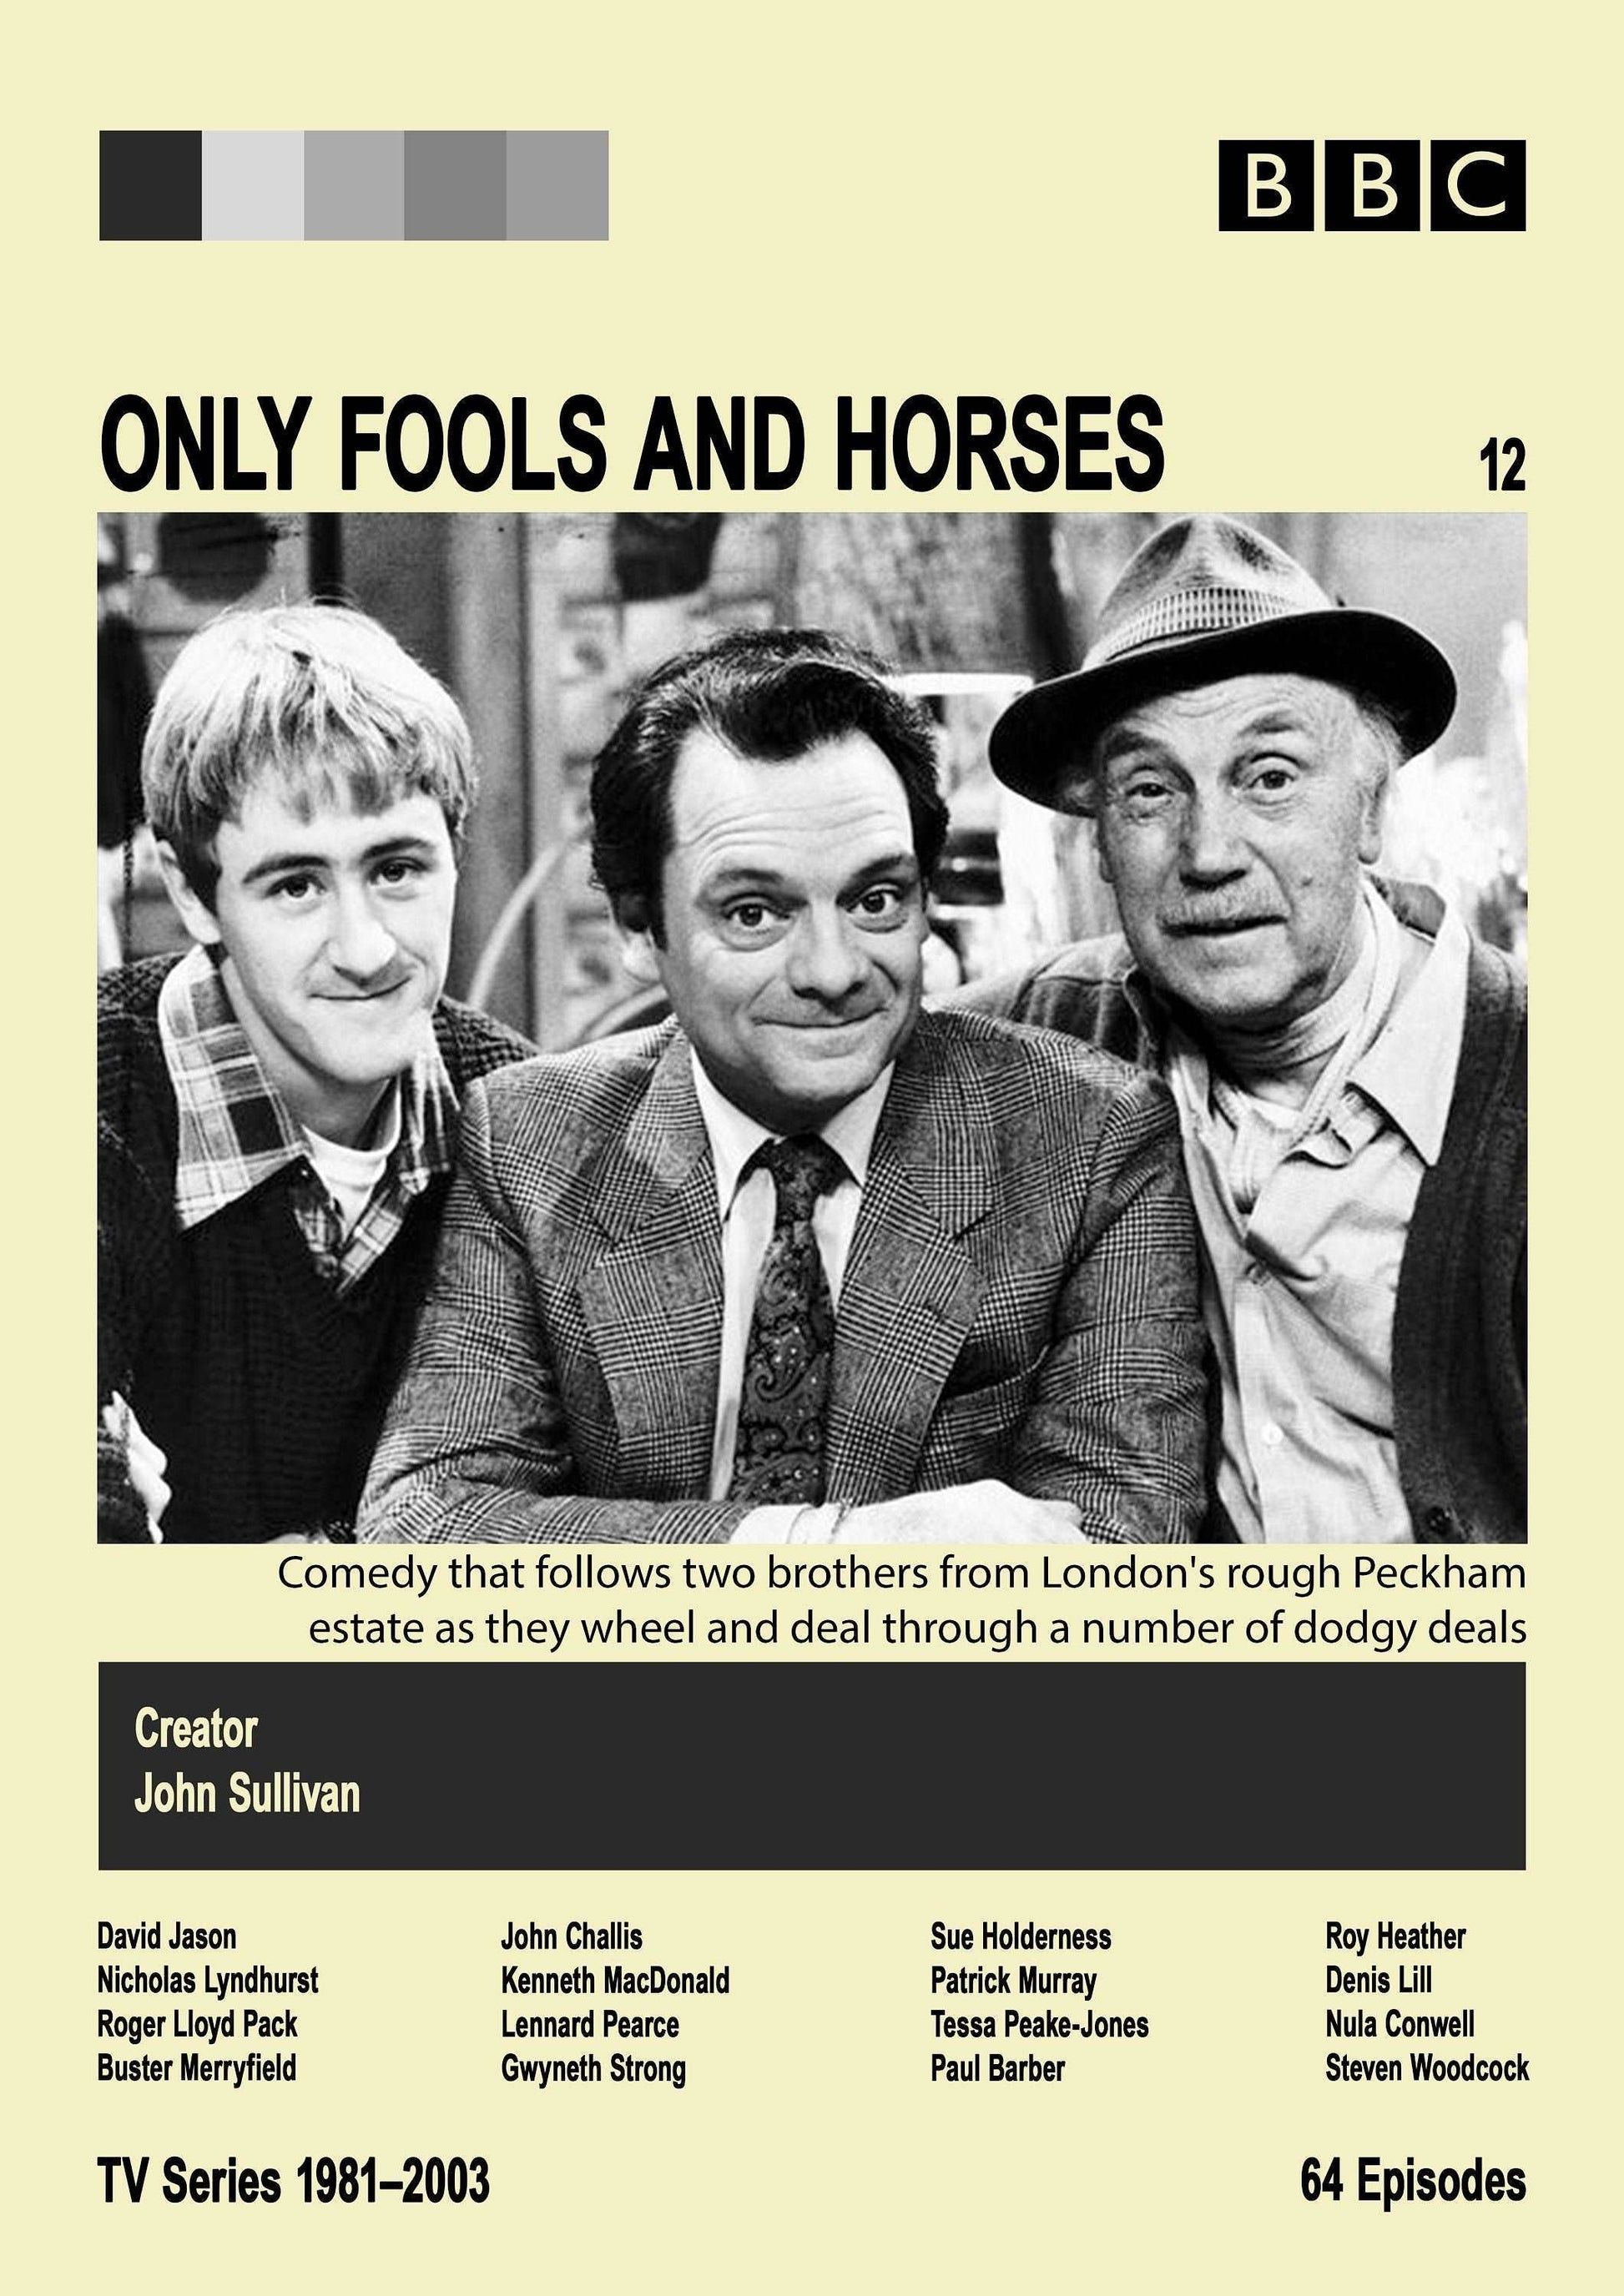 Only Fools and Horses Poster - Poster Kingz